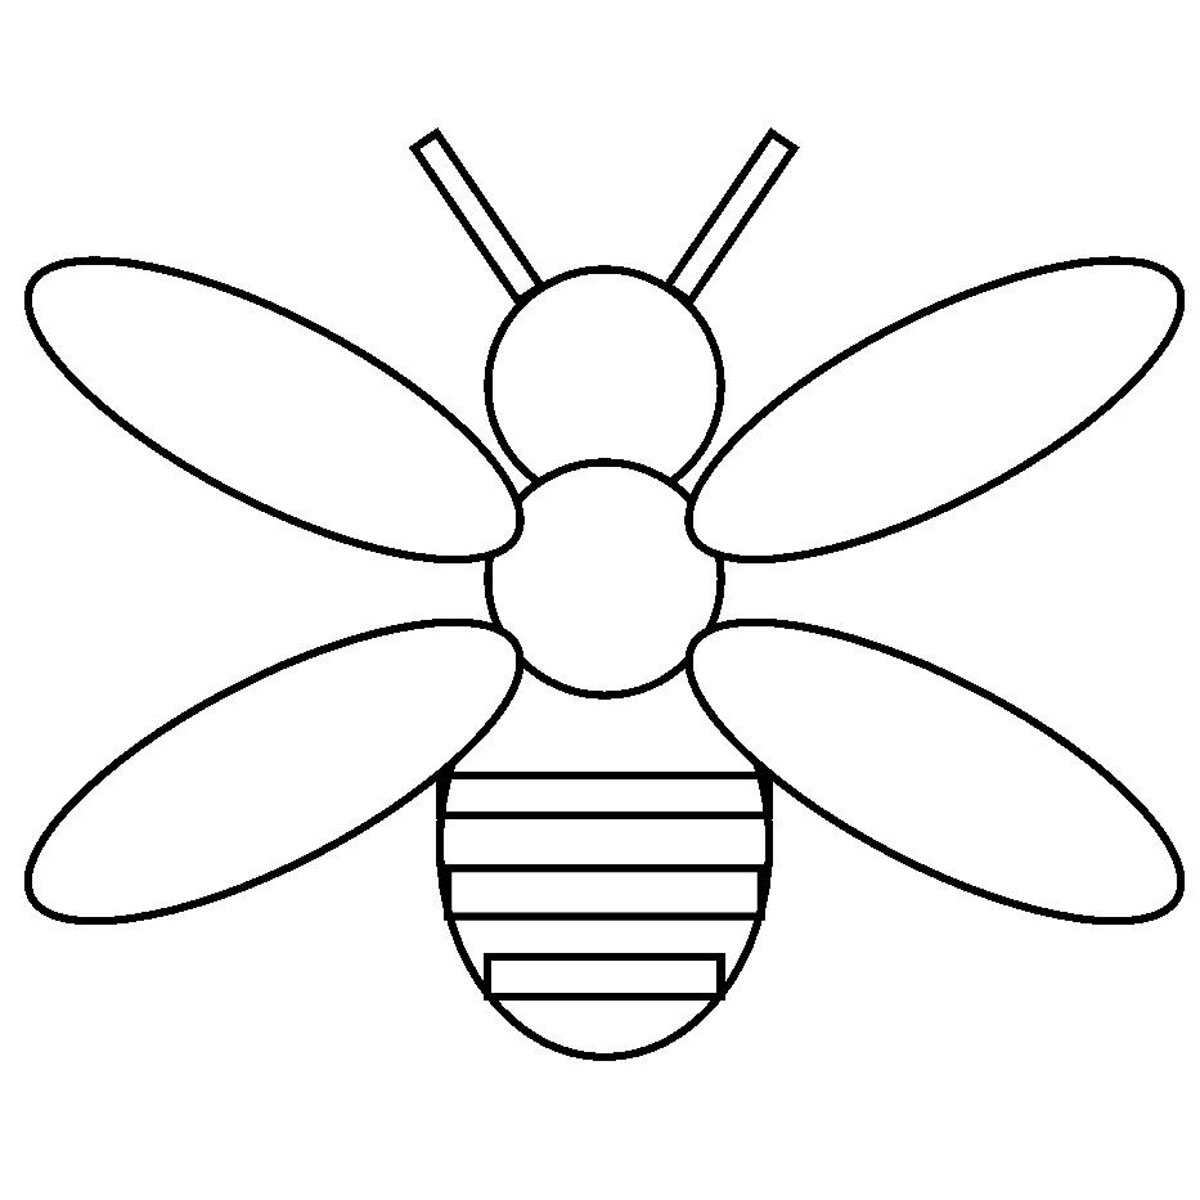 Lightning bug coloring pages - Coloring Pages  Pictures - IMAGIXS